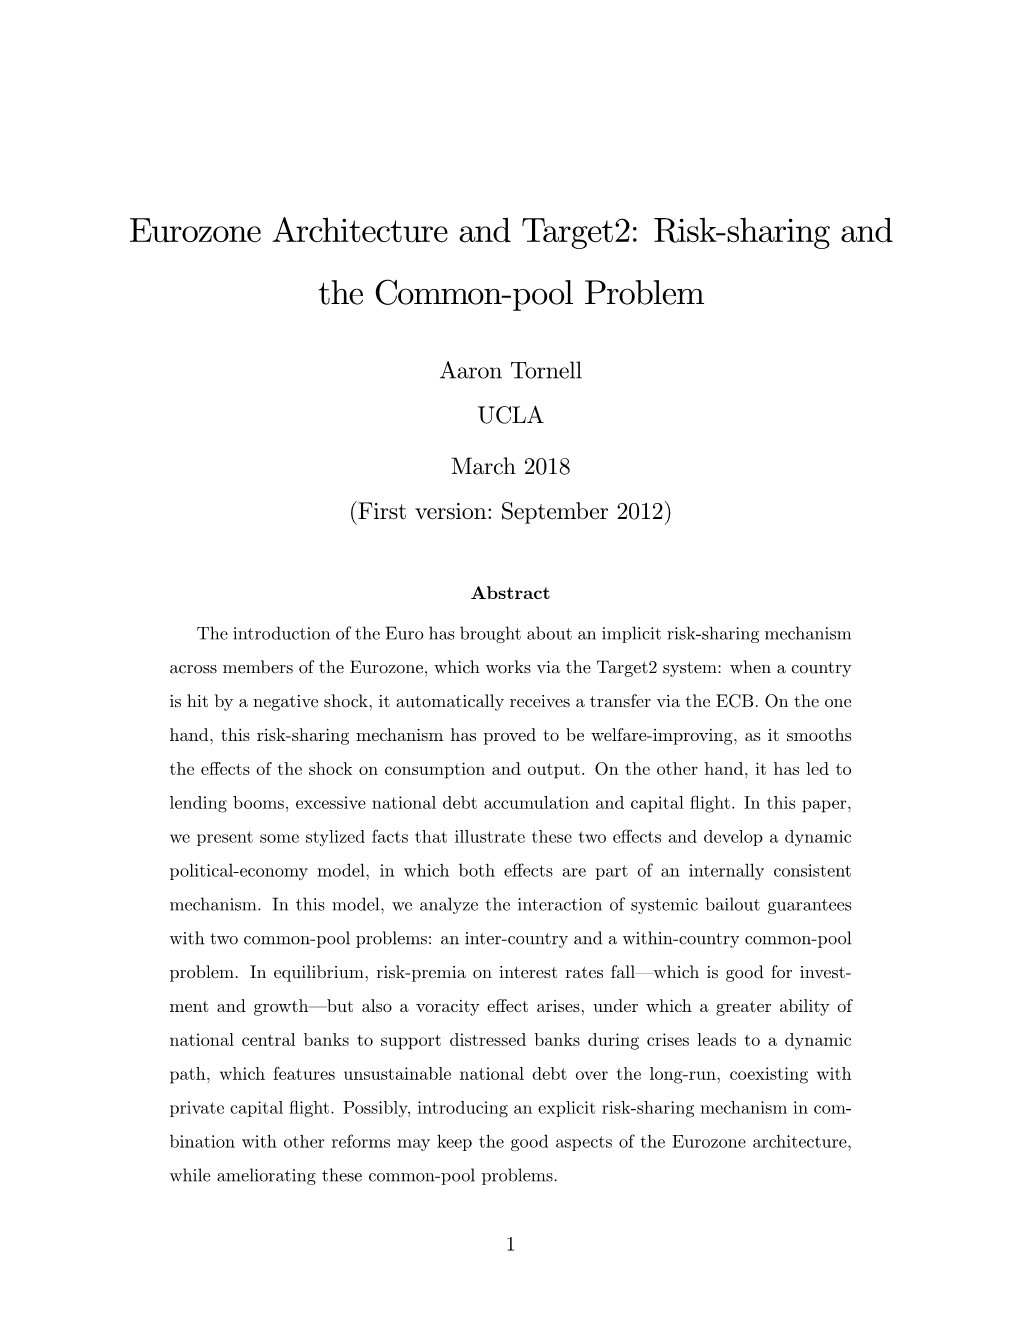 Eurozone Architecture and Target2: Risk-Sharing and the Common-Pool Problem